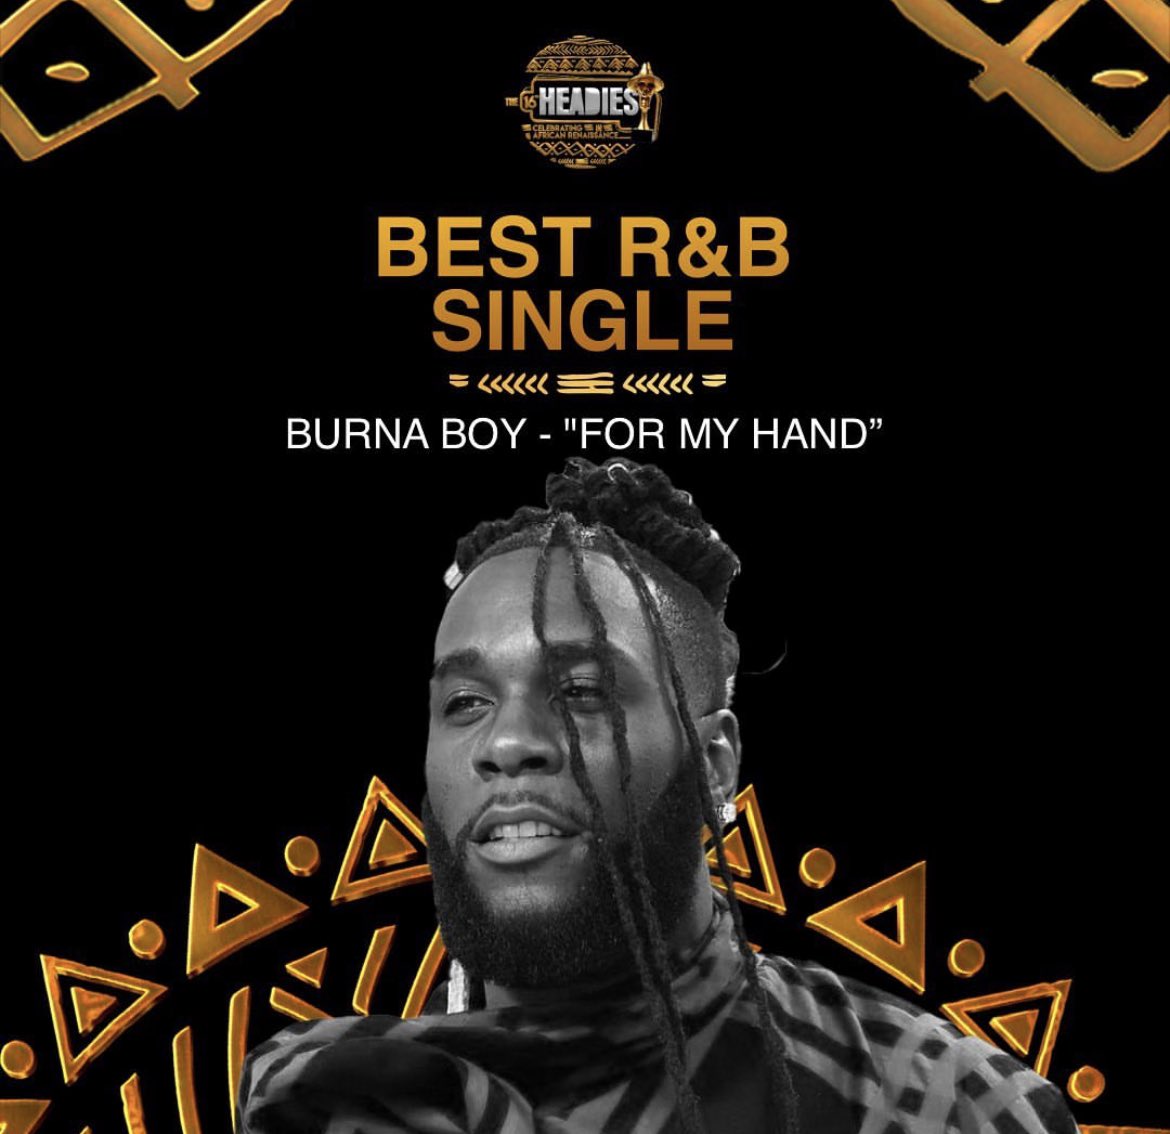 Burna Boy also won the 'Best R&B Single' for 'For My Hand' at the #16thHeadiesAwards

— Burna Boy has now won a total of 9 Headies Award
— He's tied as the Artist with the most win tonight.

#Headies 
#TheHeadiesAwards
#16thHeadies